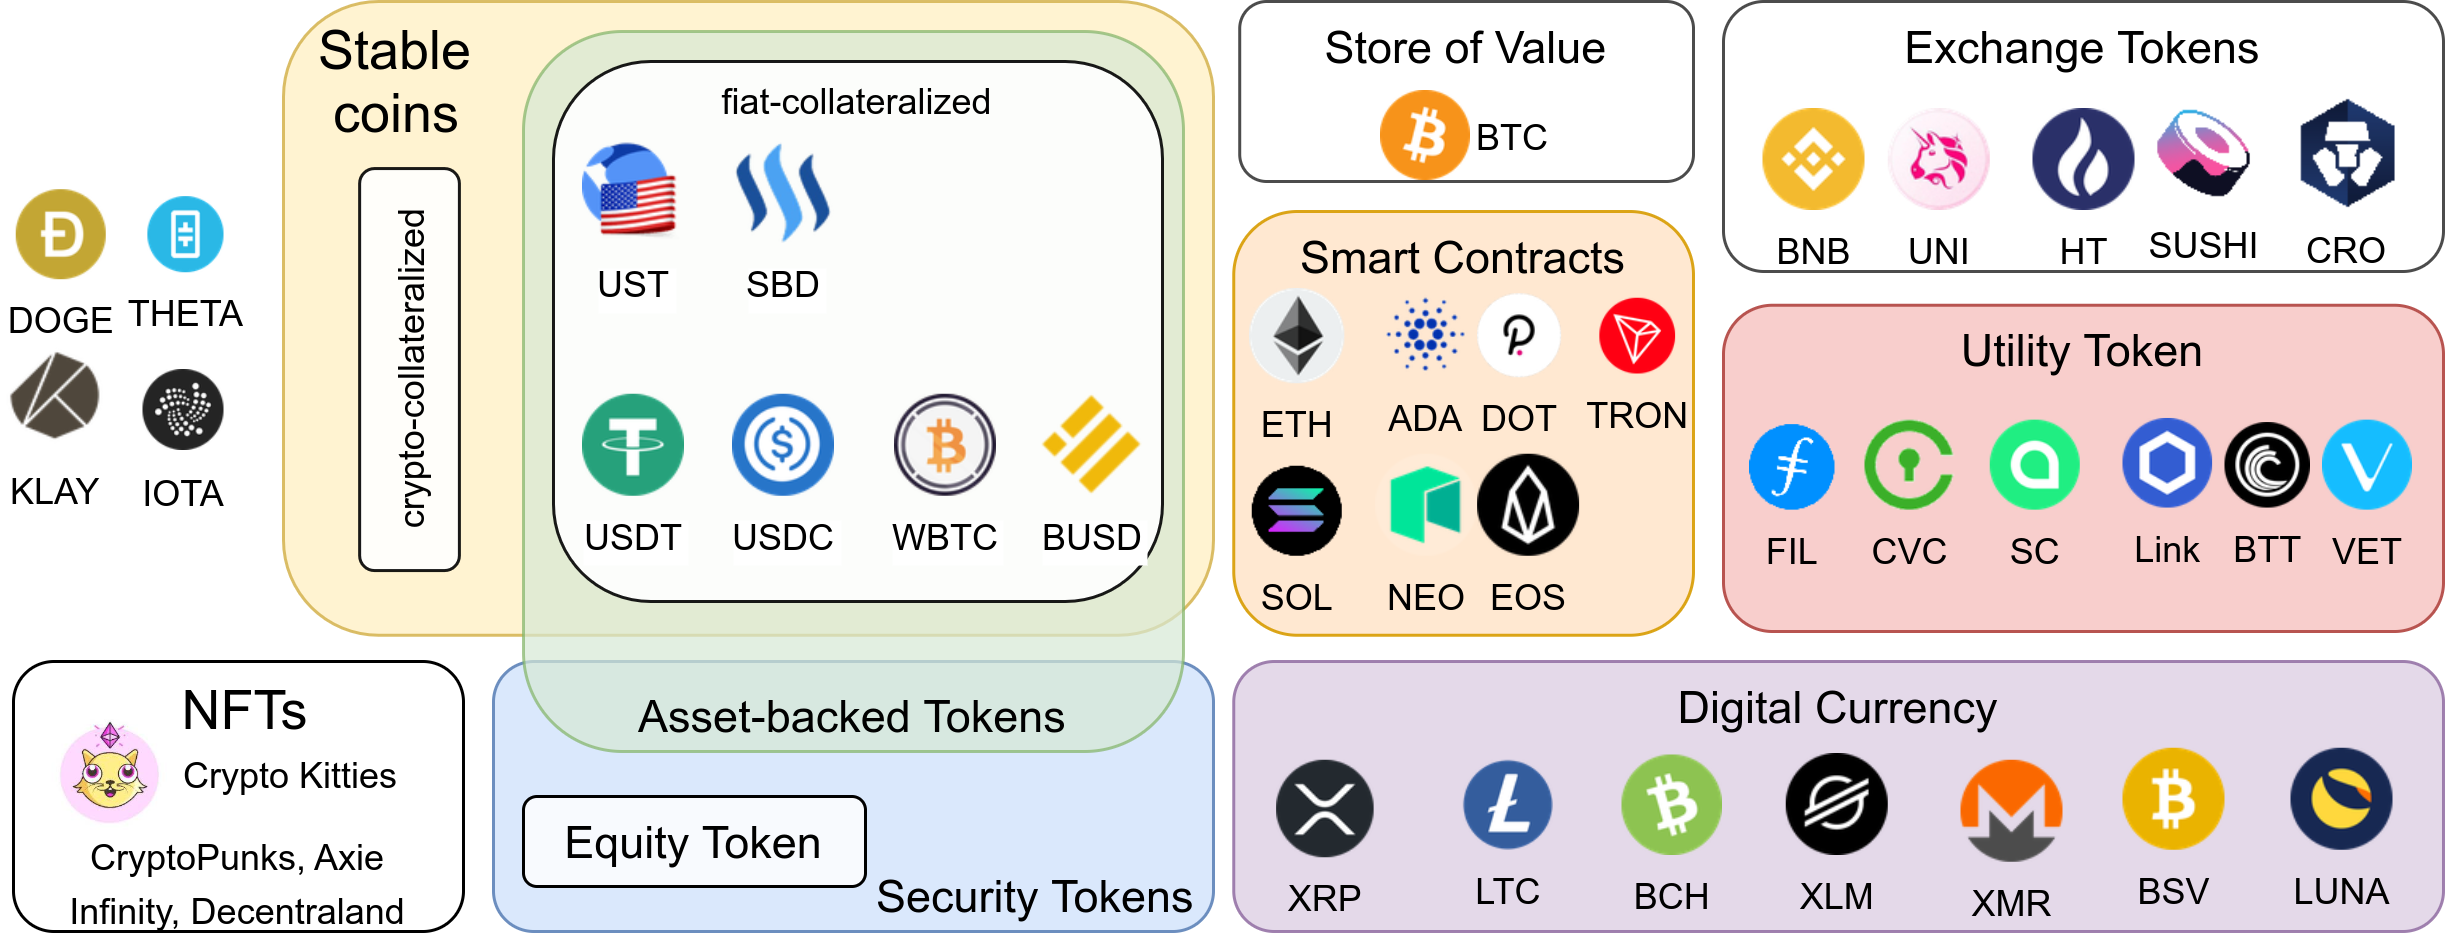 cryptocurrency types of coins